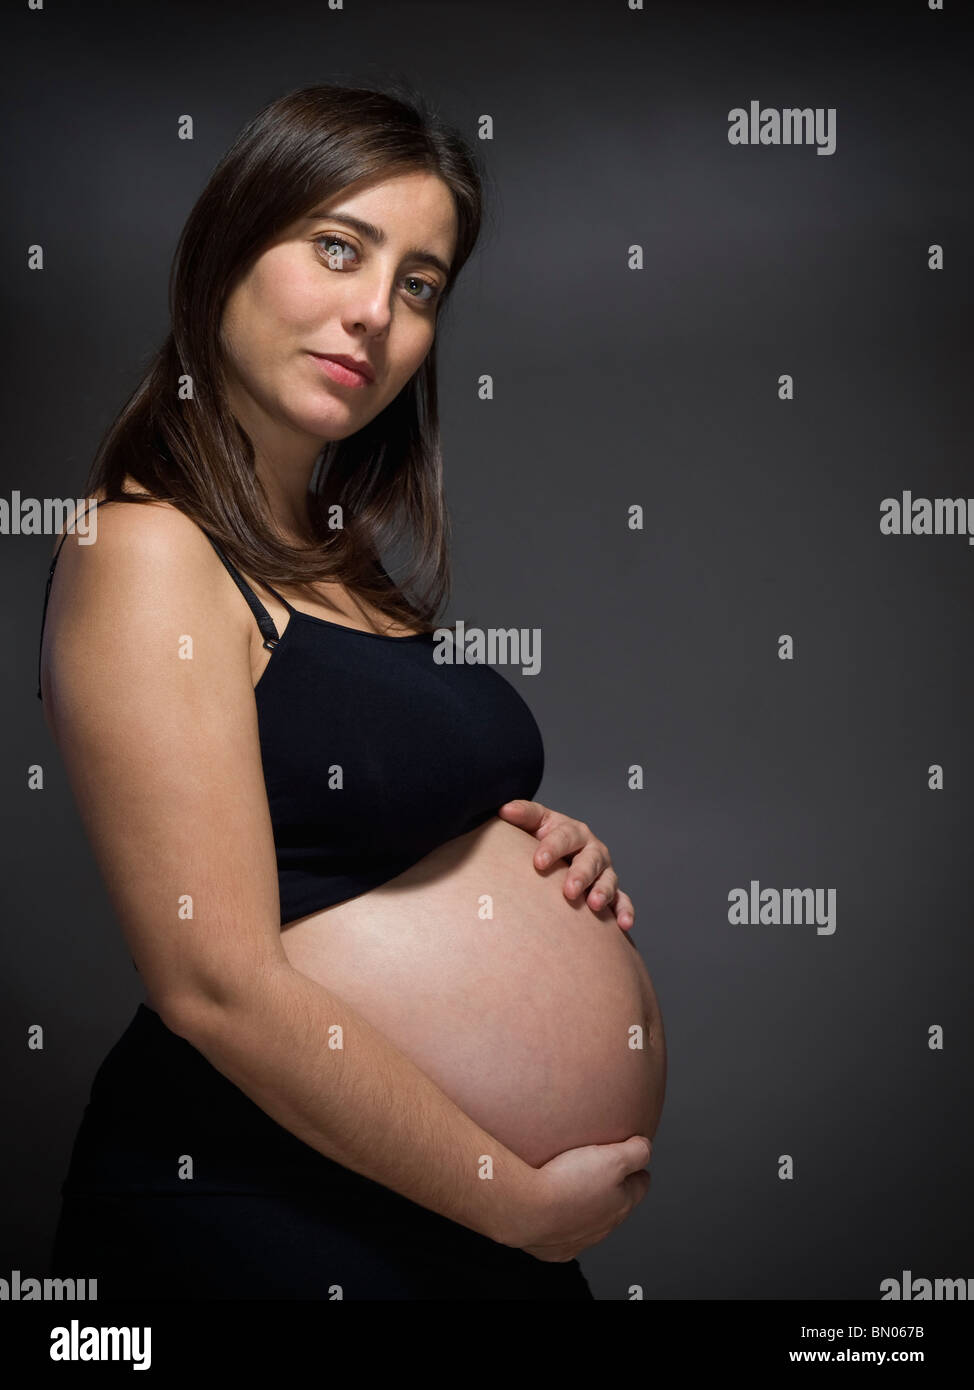 A pregnant woman holds her big belly over a gray background. Stock Photo